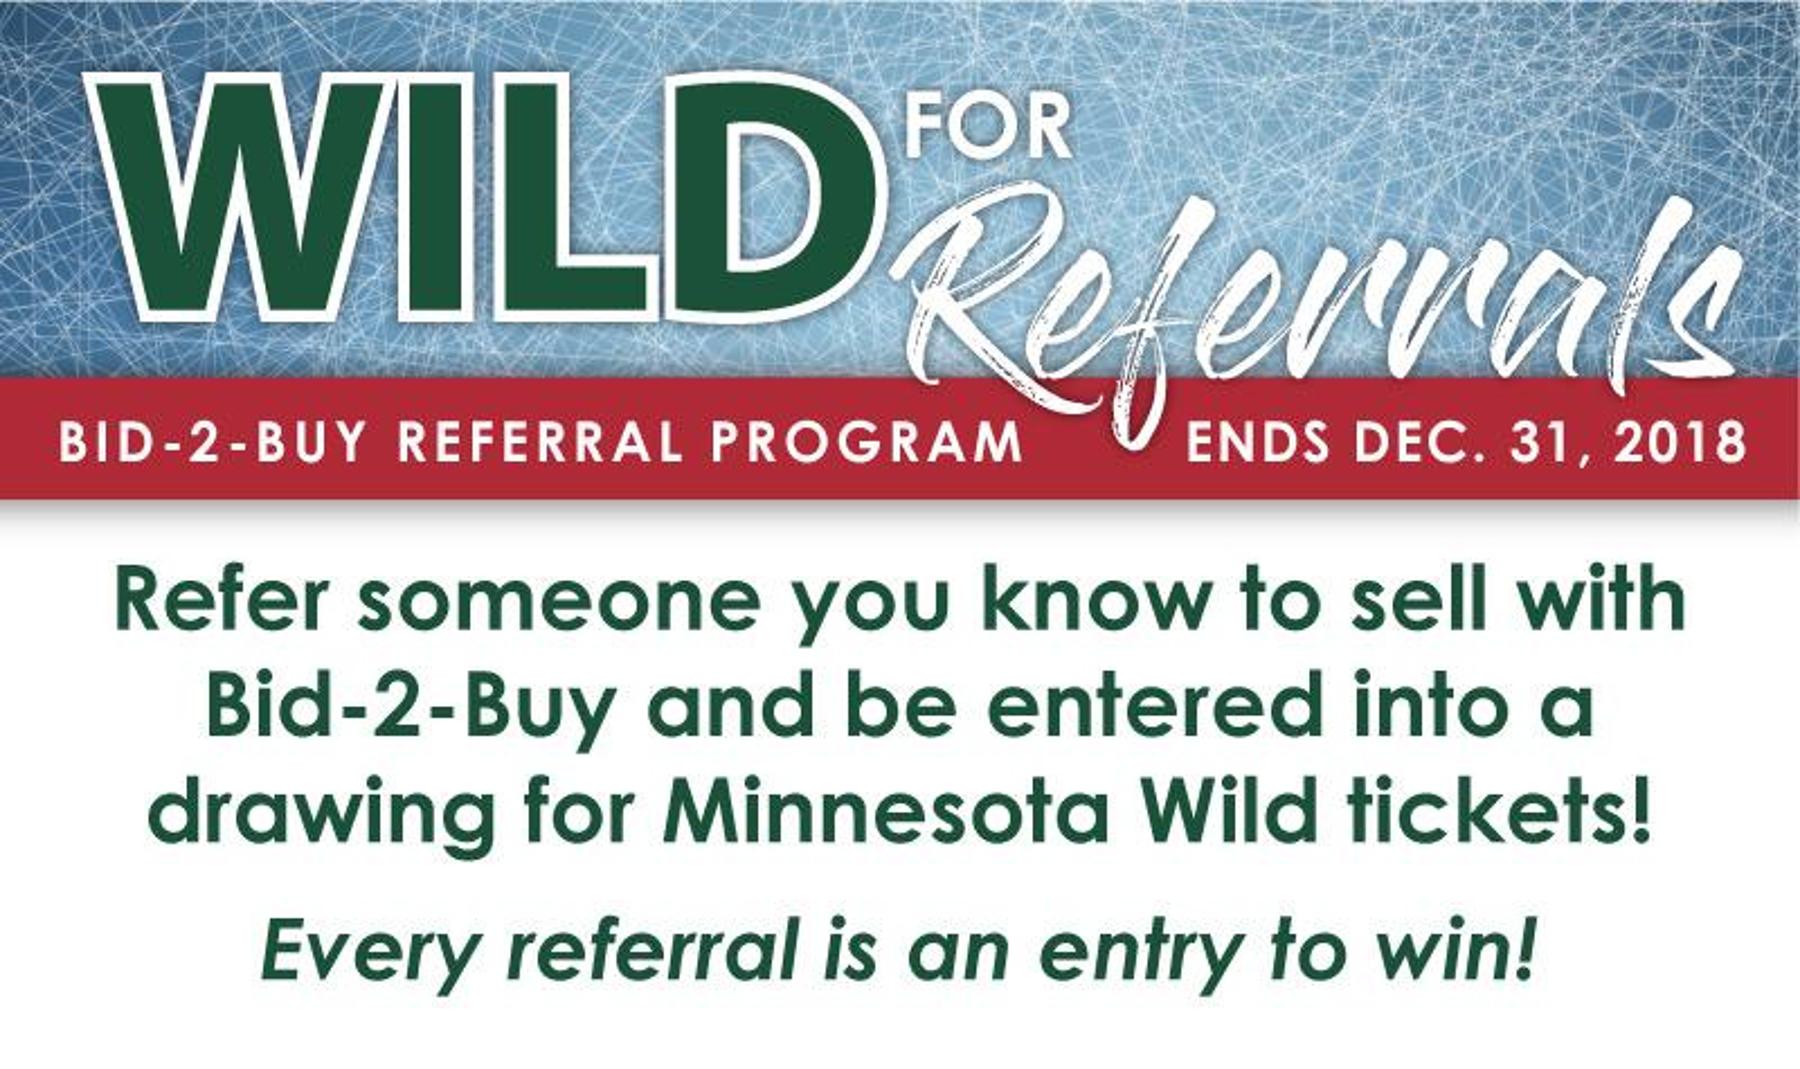 Refer Someone You Know to Sell With Bid-2-Buy and be Entered Into a Drawing for a Pair of Minnesota Wild Tickets!